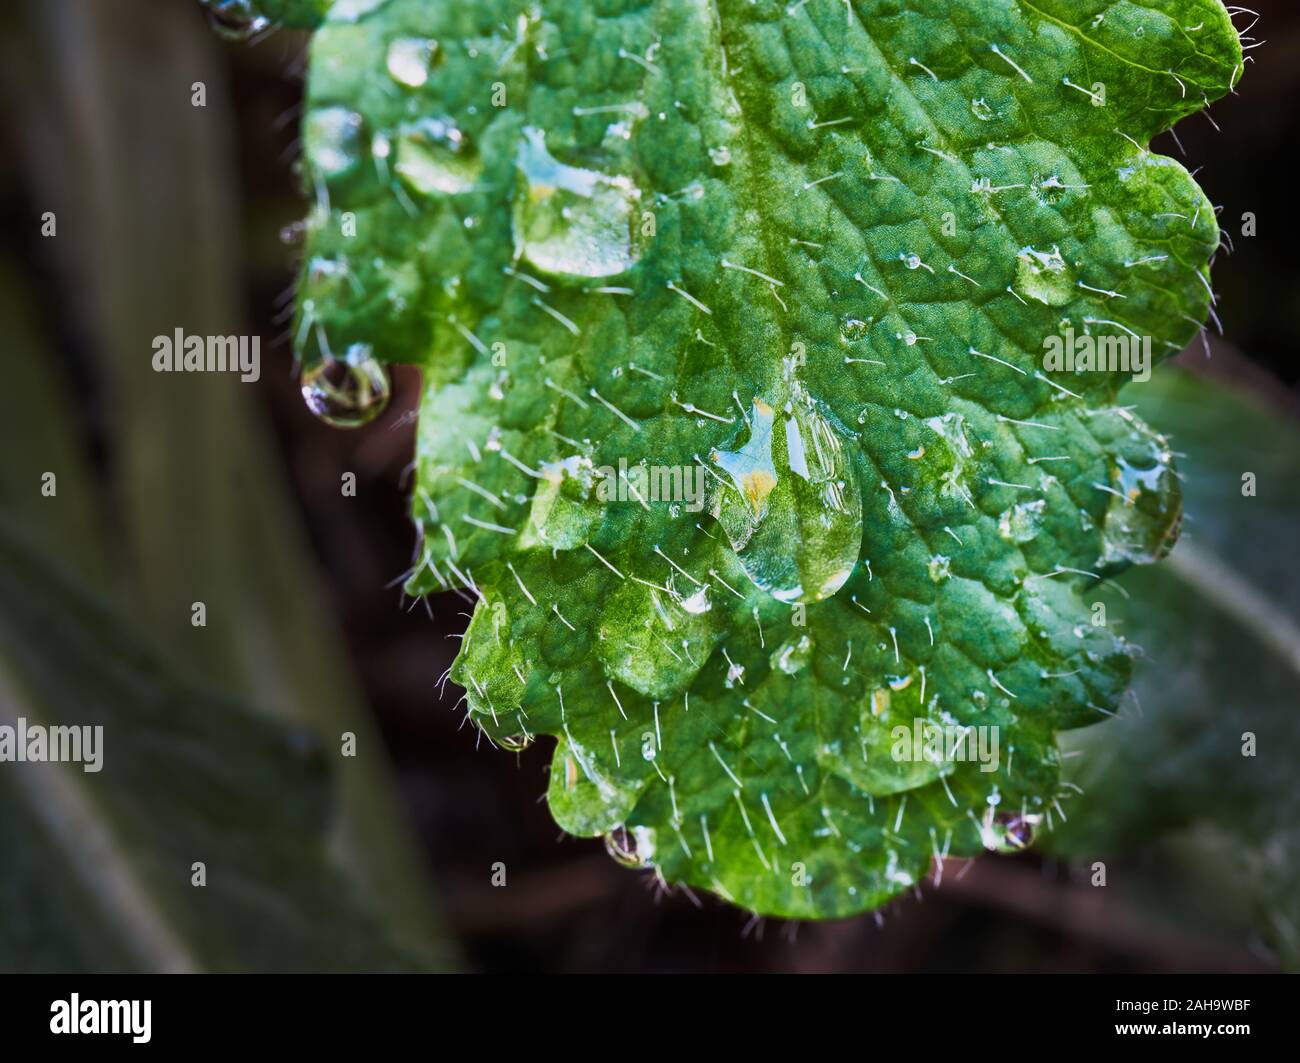 Close-up of a green leaf with white cilia and drops of water, blurred background Stock Photo